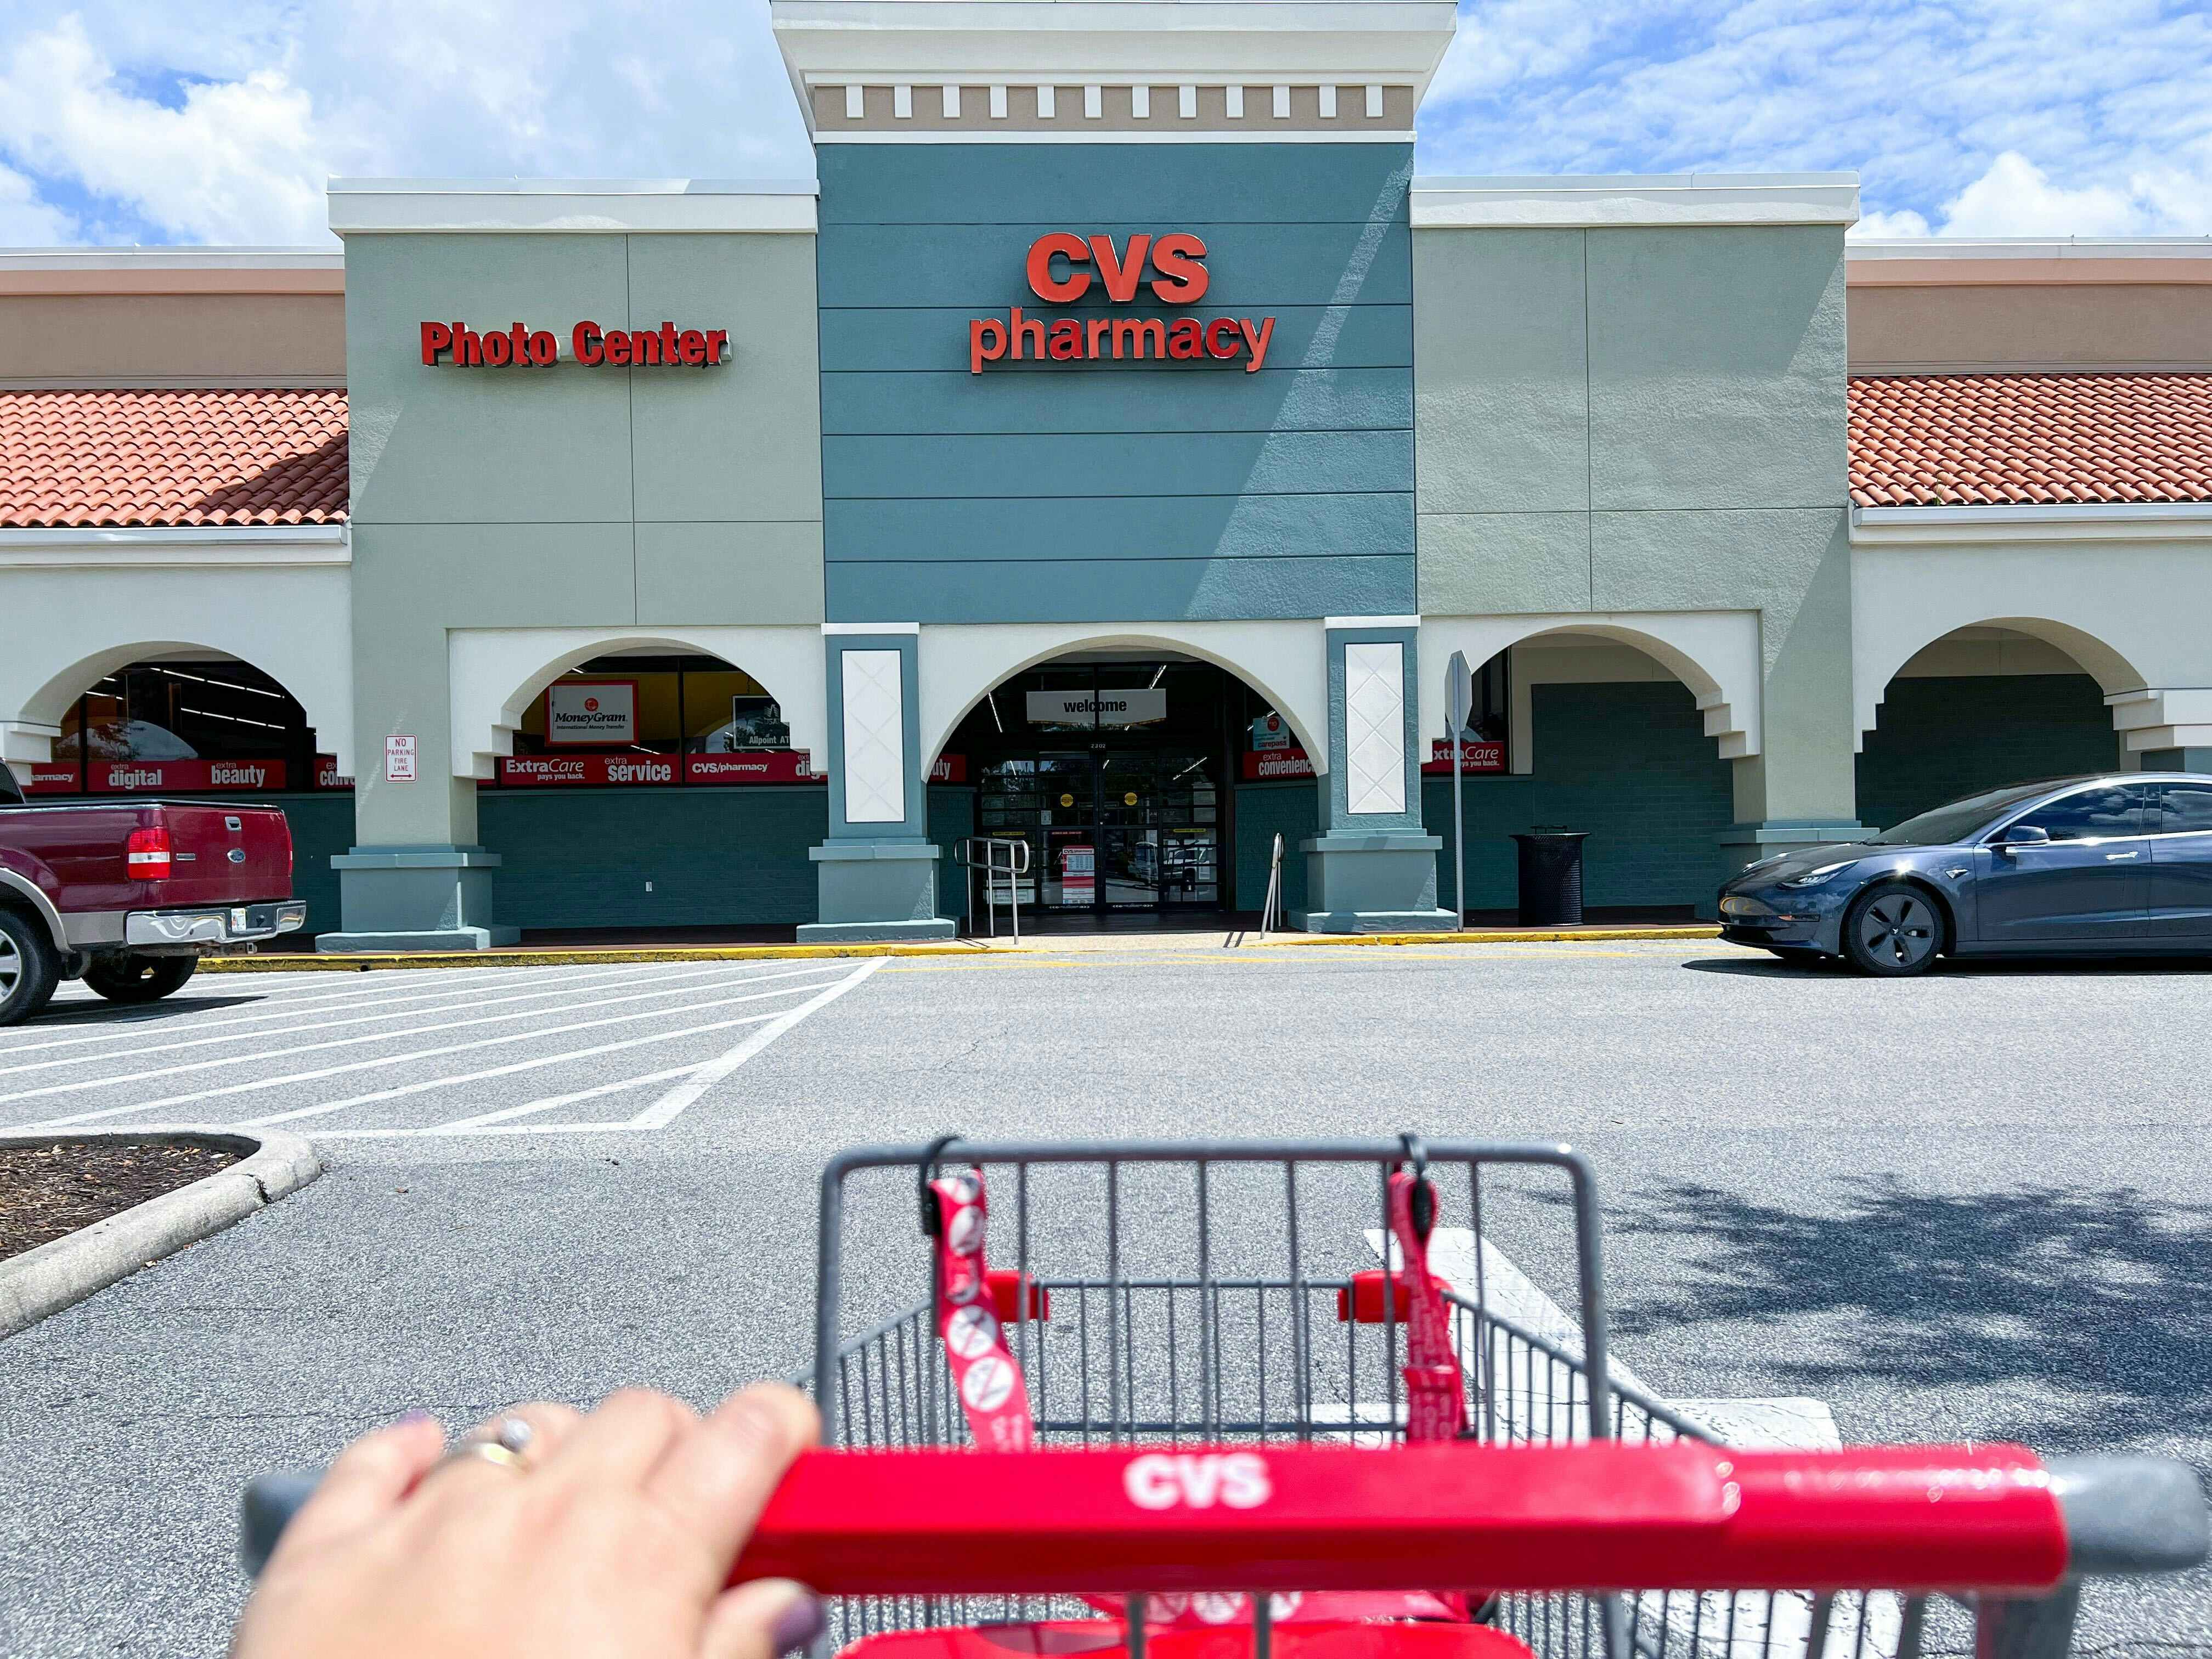 Hand pushing a shopping cart from the road into a CVS